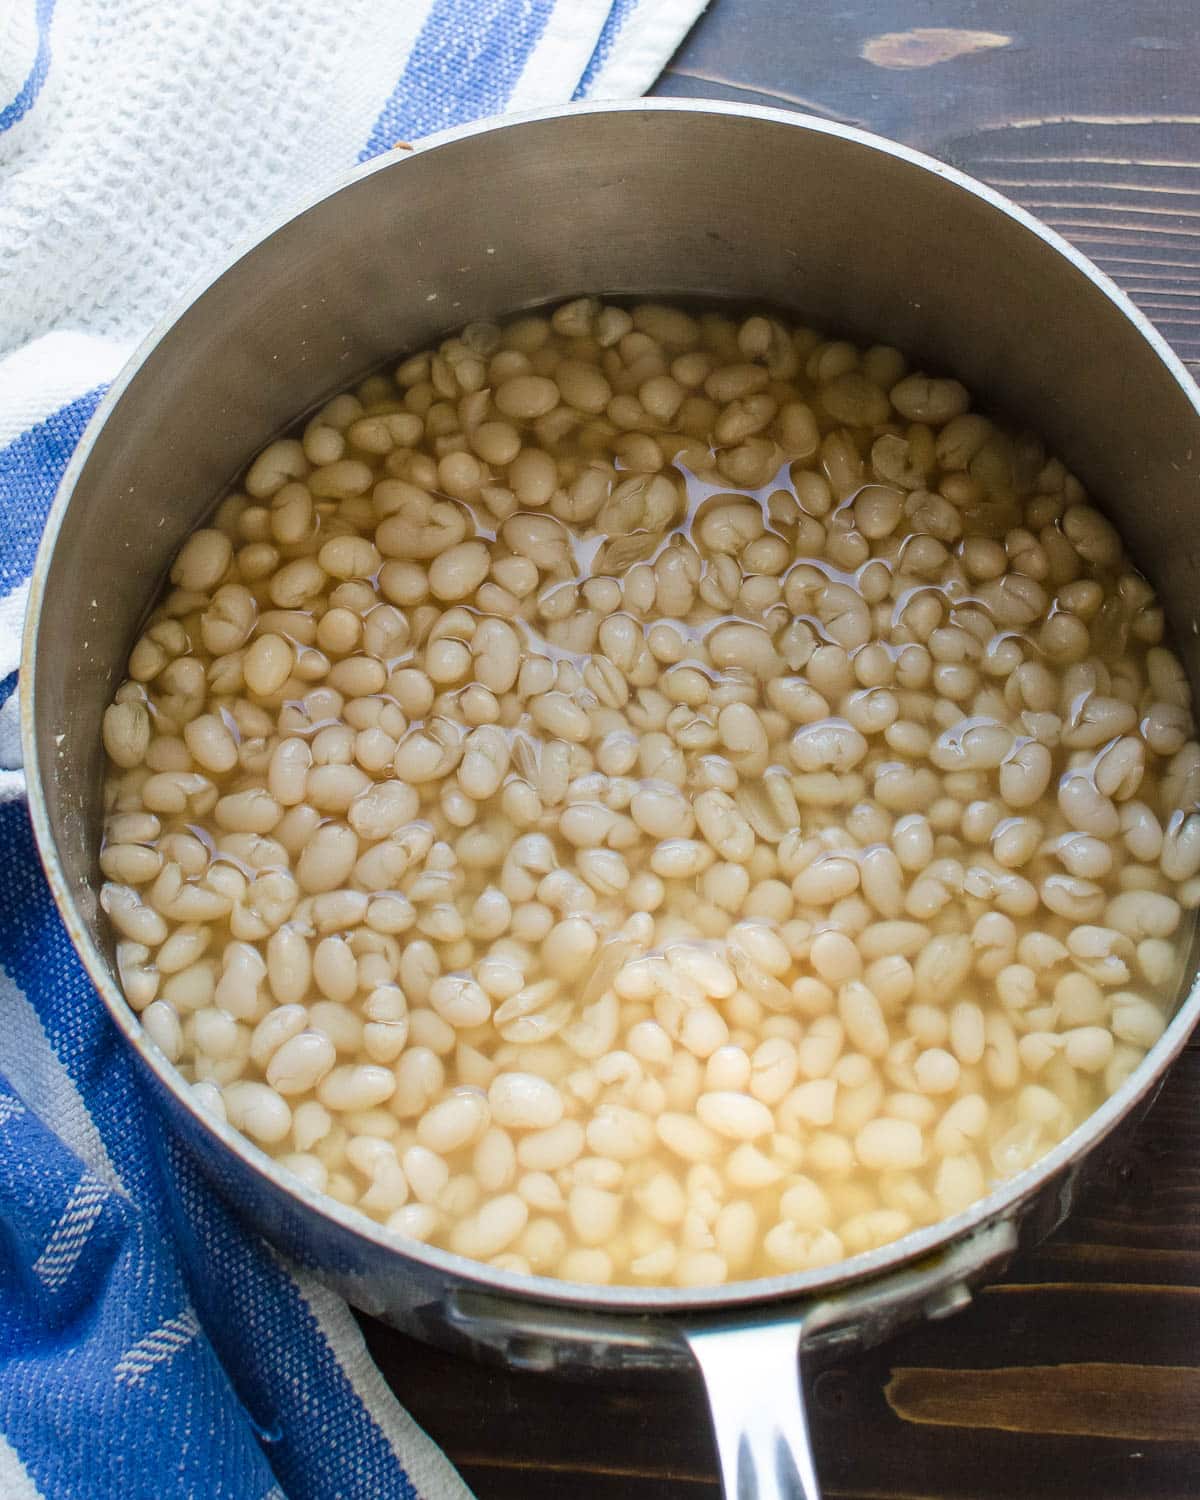 The white beans after cooking.